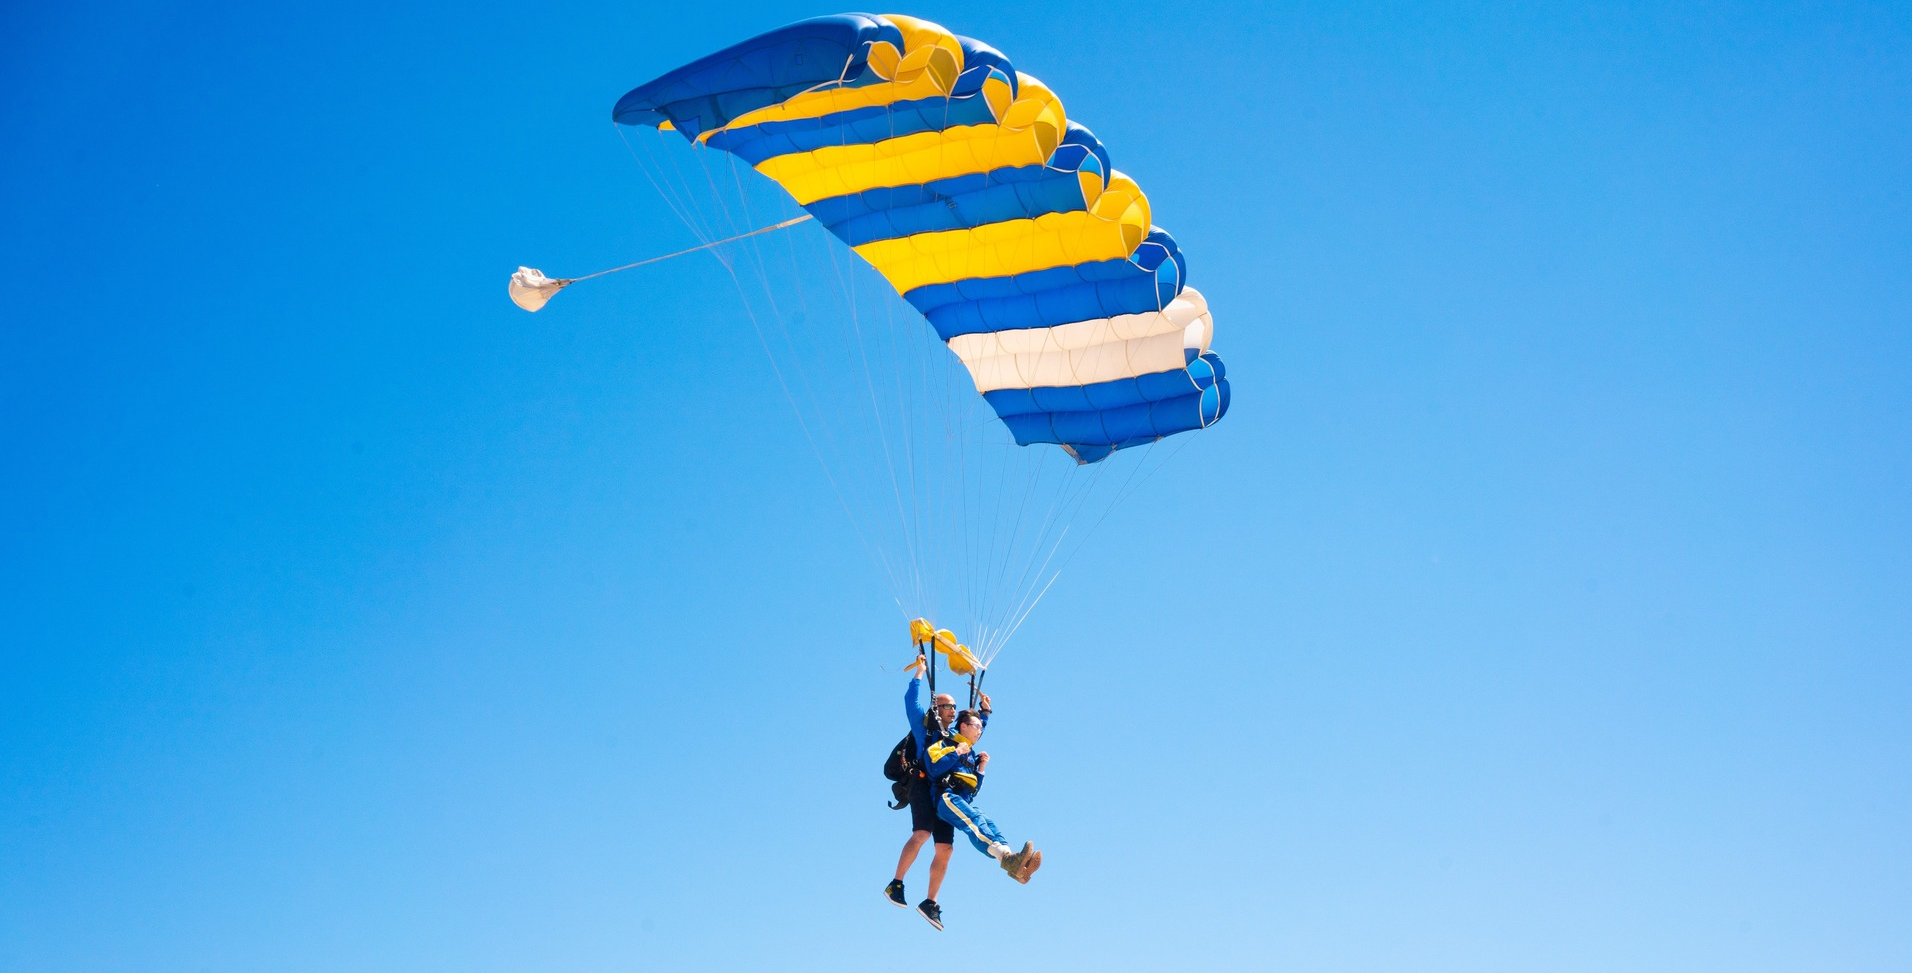 Save $80 OFF on your up to 15,000ft tandem skydive with coupon